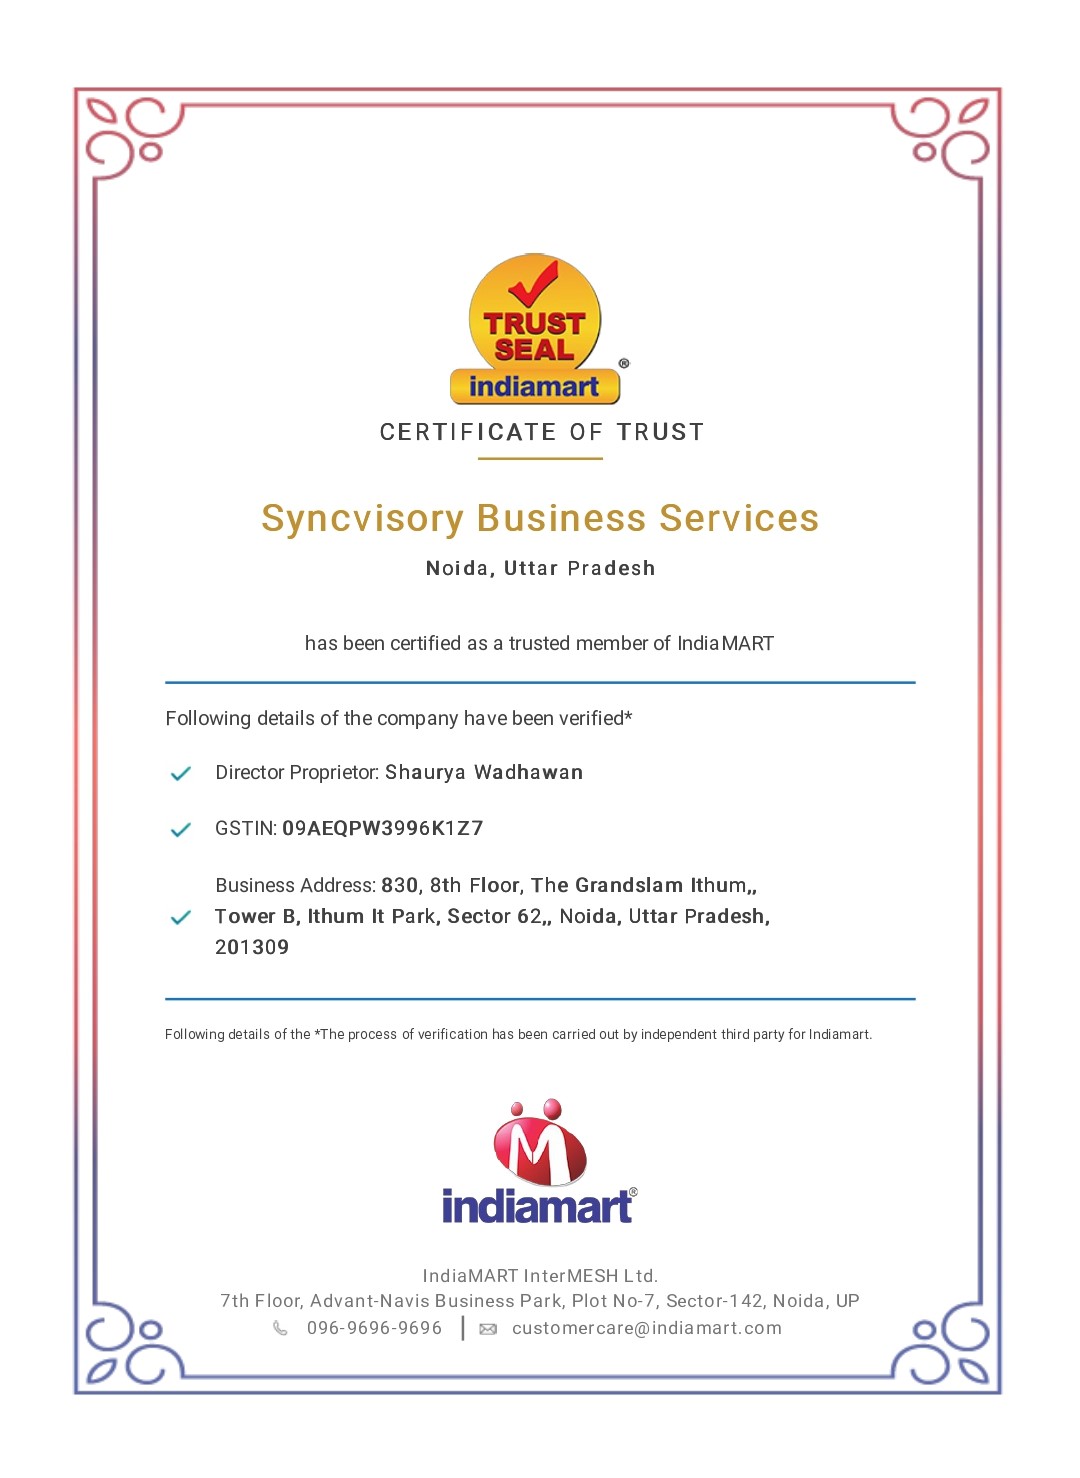 Indiamart Trust Seal Certficate For SyncVisory Business Services